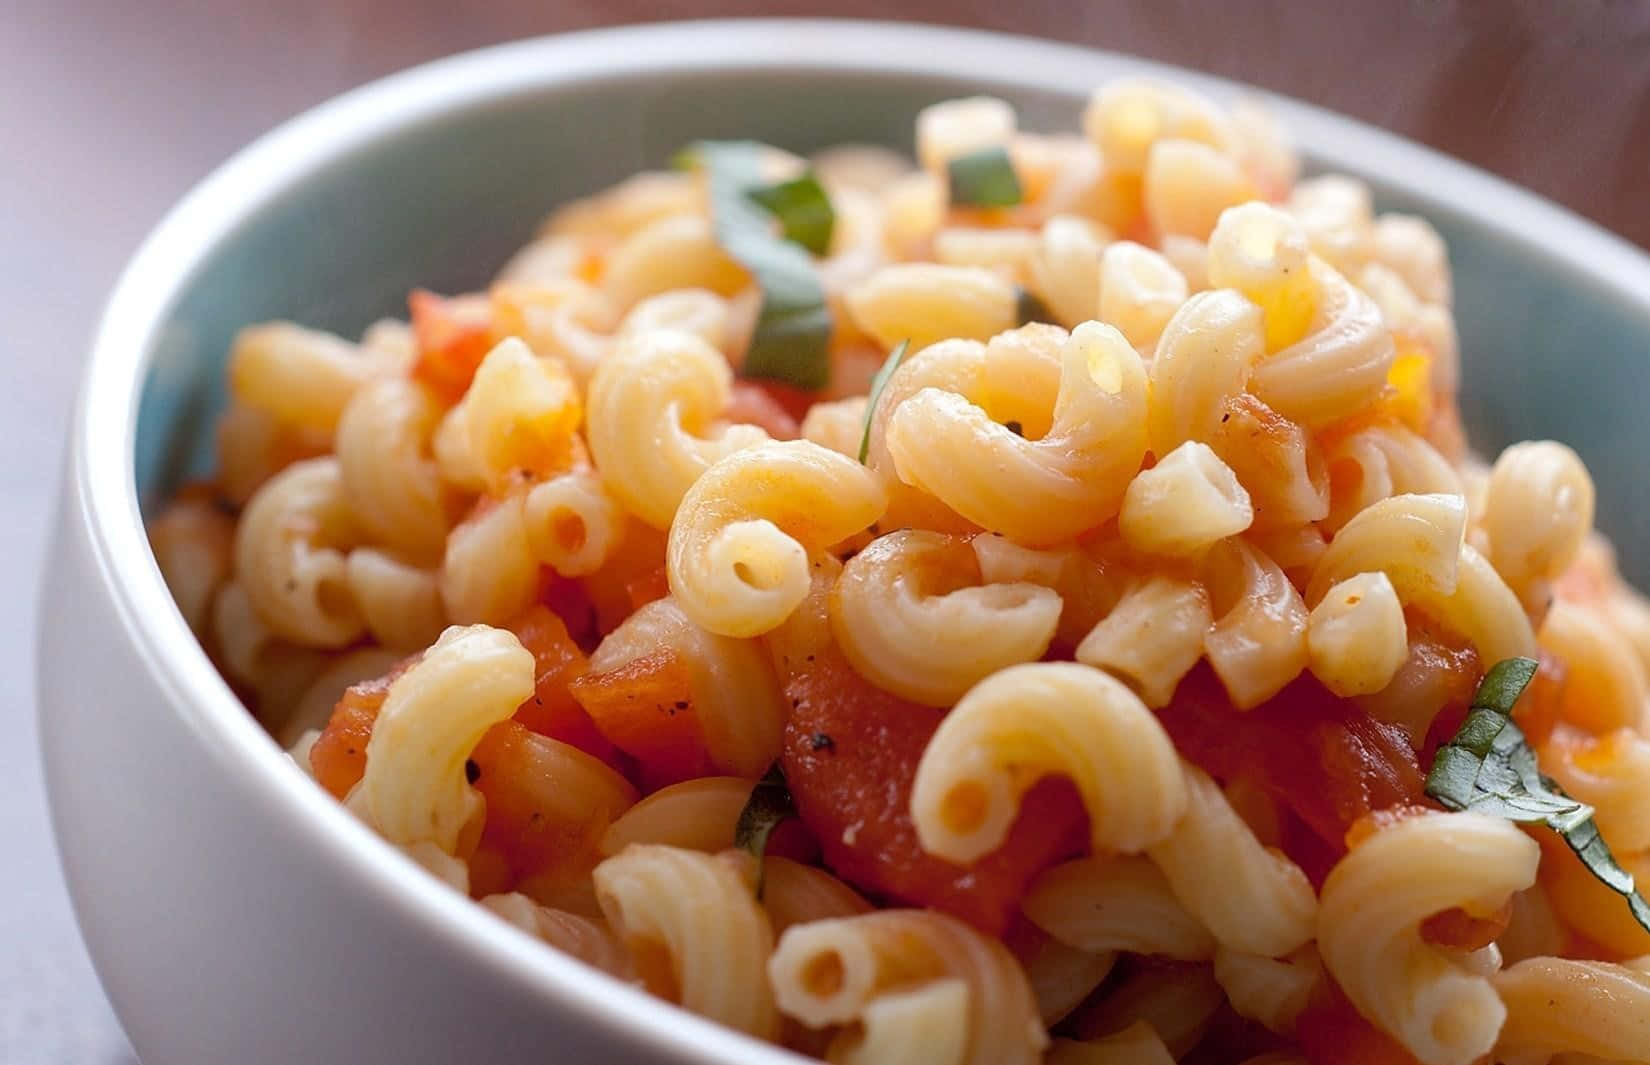 A Bowl Of Pasta With Tomatoes And Basil